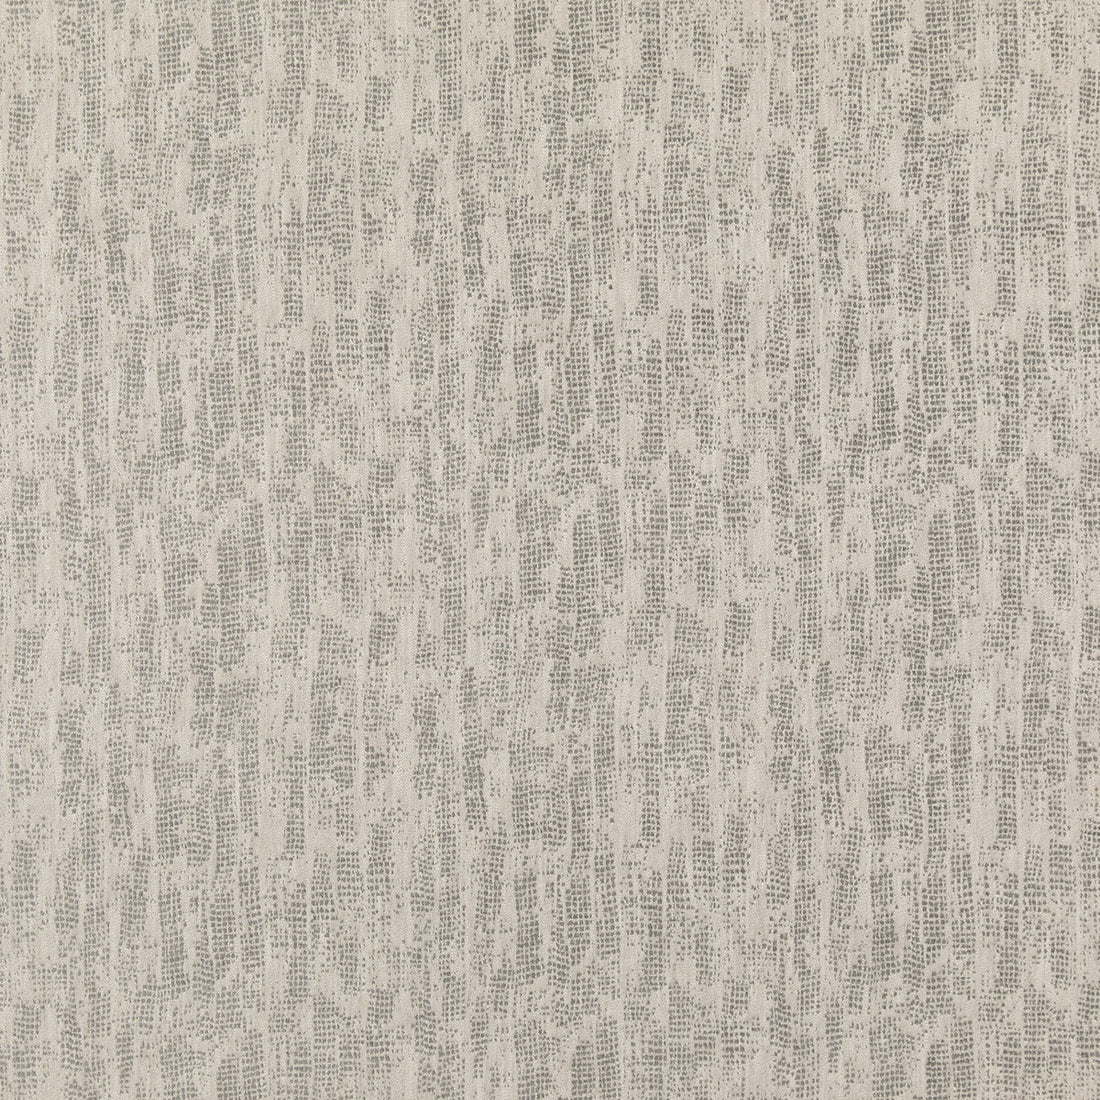 Verse fabric in salt/pepper color - pattern GWF-3735.11.0 - by Lee Jofa Modern in the Kelly Wearstler IV collection